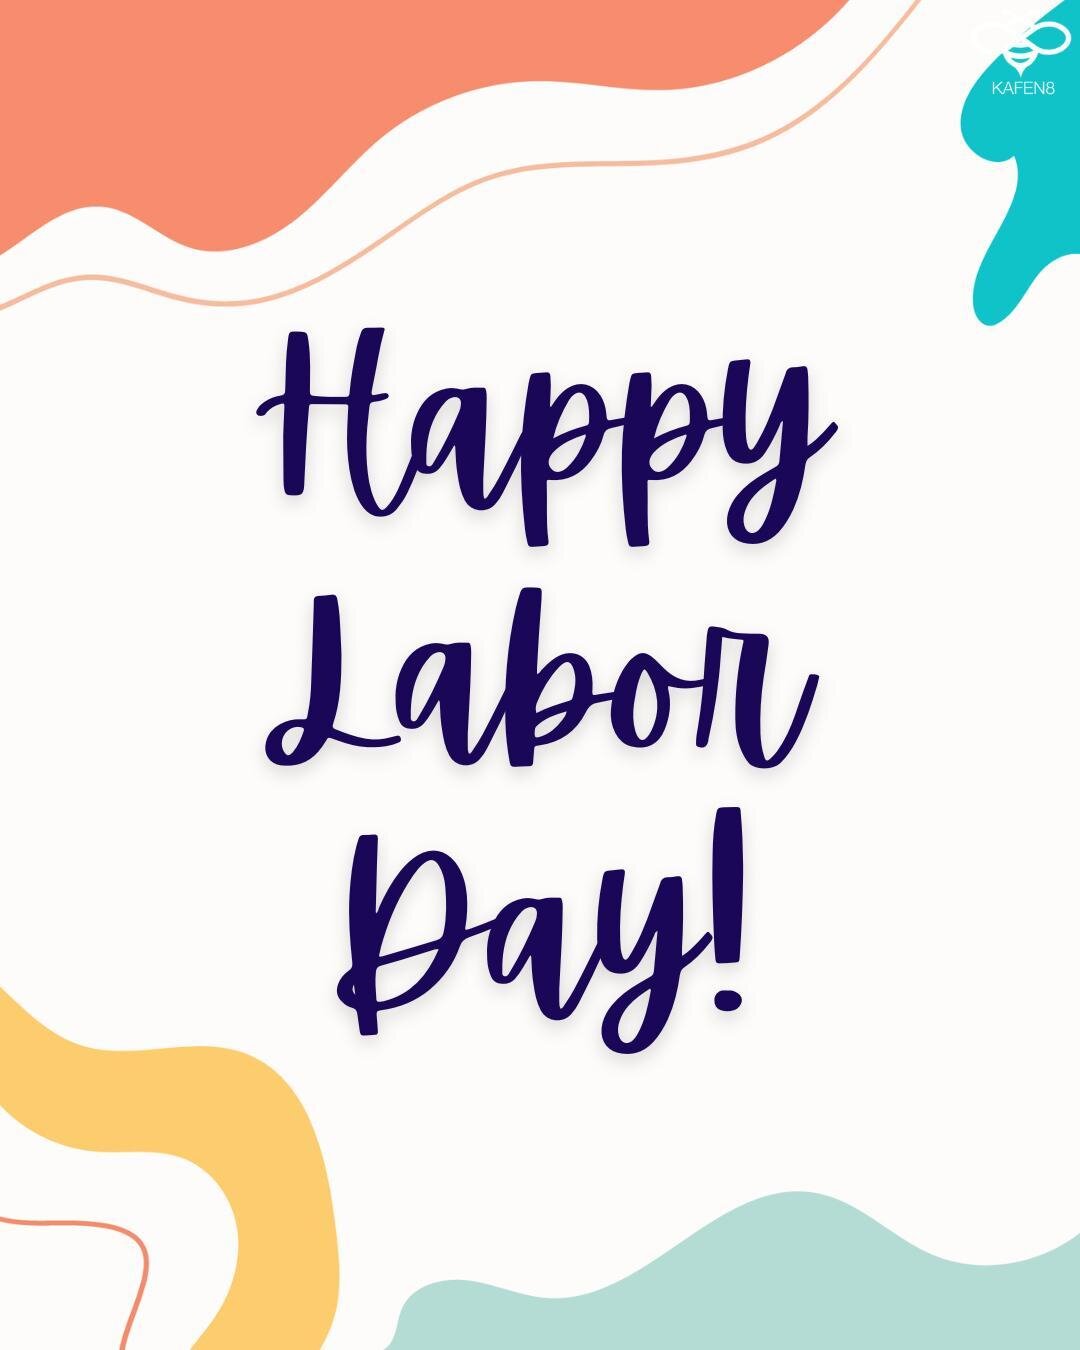 Happy Labor Day, everyone!

Today we take the time to appreciate the hard work of our team and those around us.

#laborday #womenbusinesses #Kafen8 #smallbusinesshelpforbusiness 
#supportsmallbusinesses #bizlife #smallbusinesssupportingsmallbusiness 